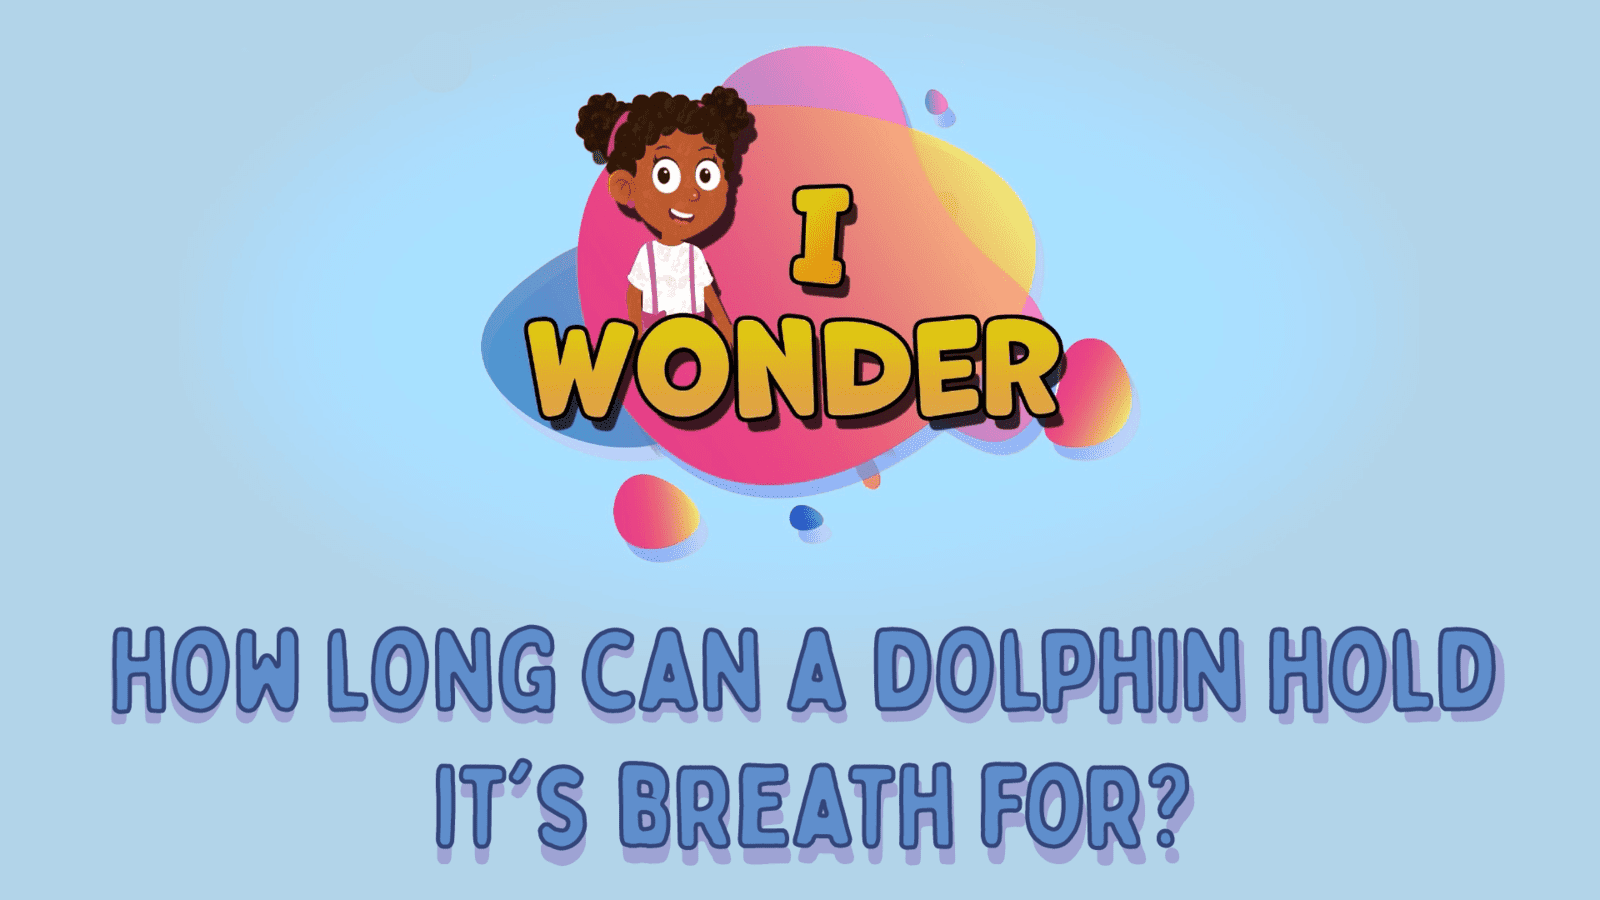 How Long Can A Dolphin Hold It’s Breath For?